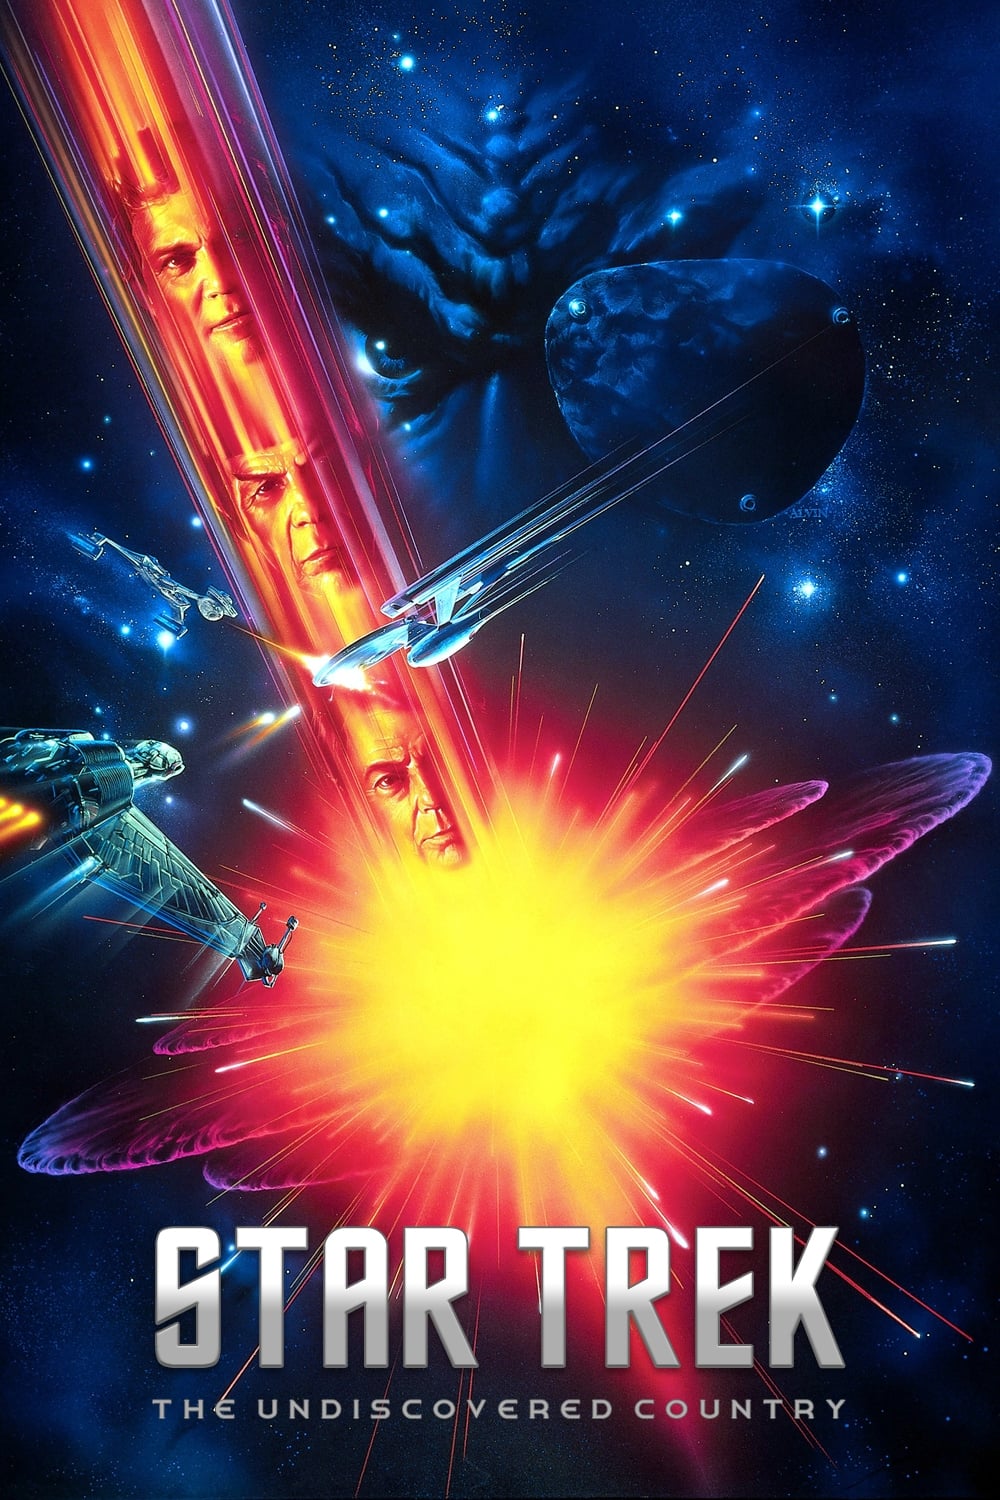 1991 Star Trek VI: The Undiscovered Country